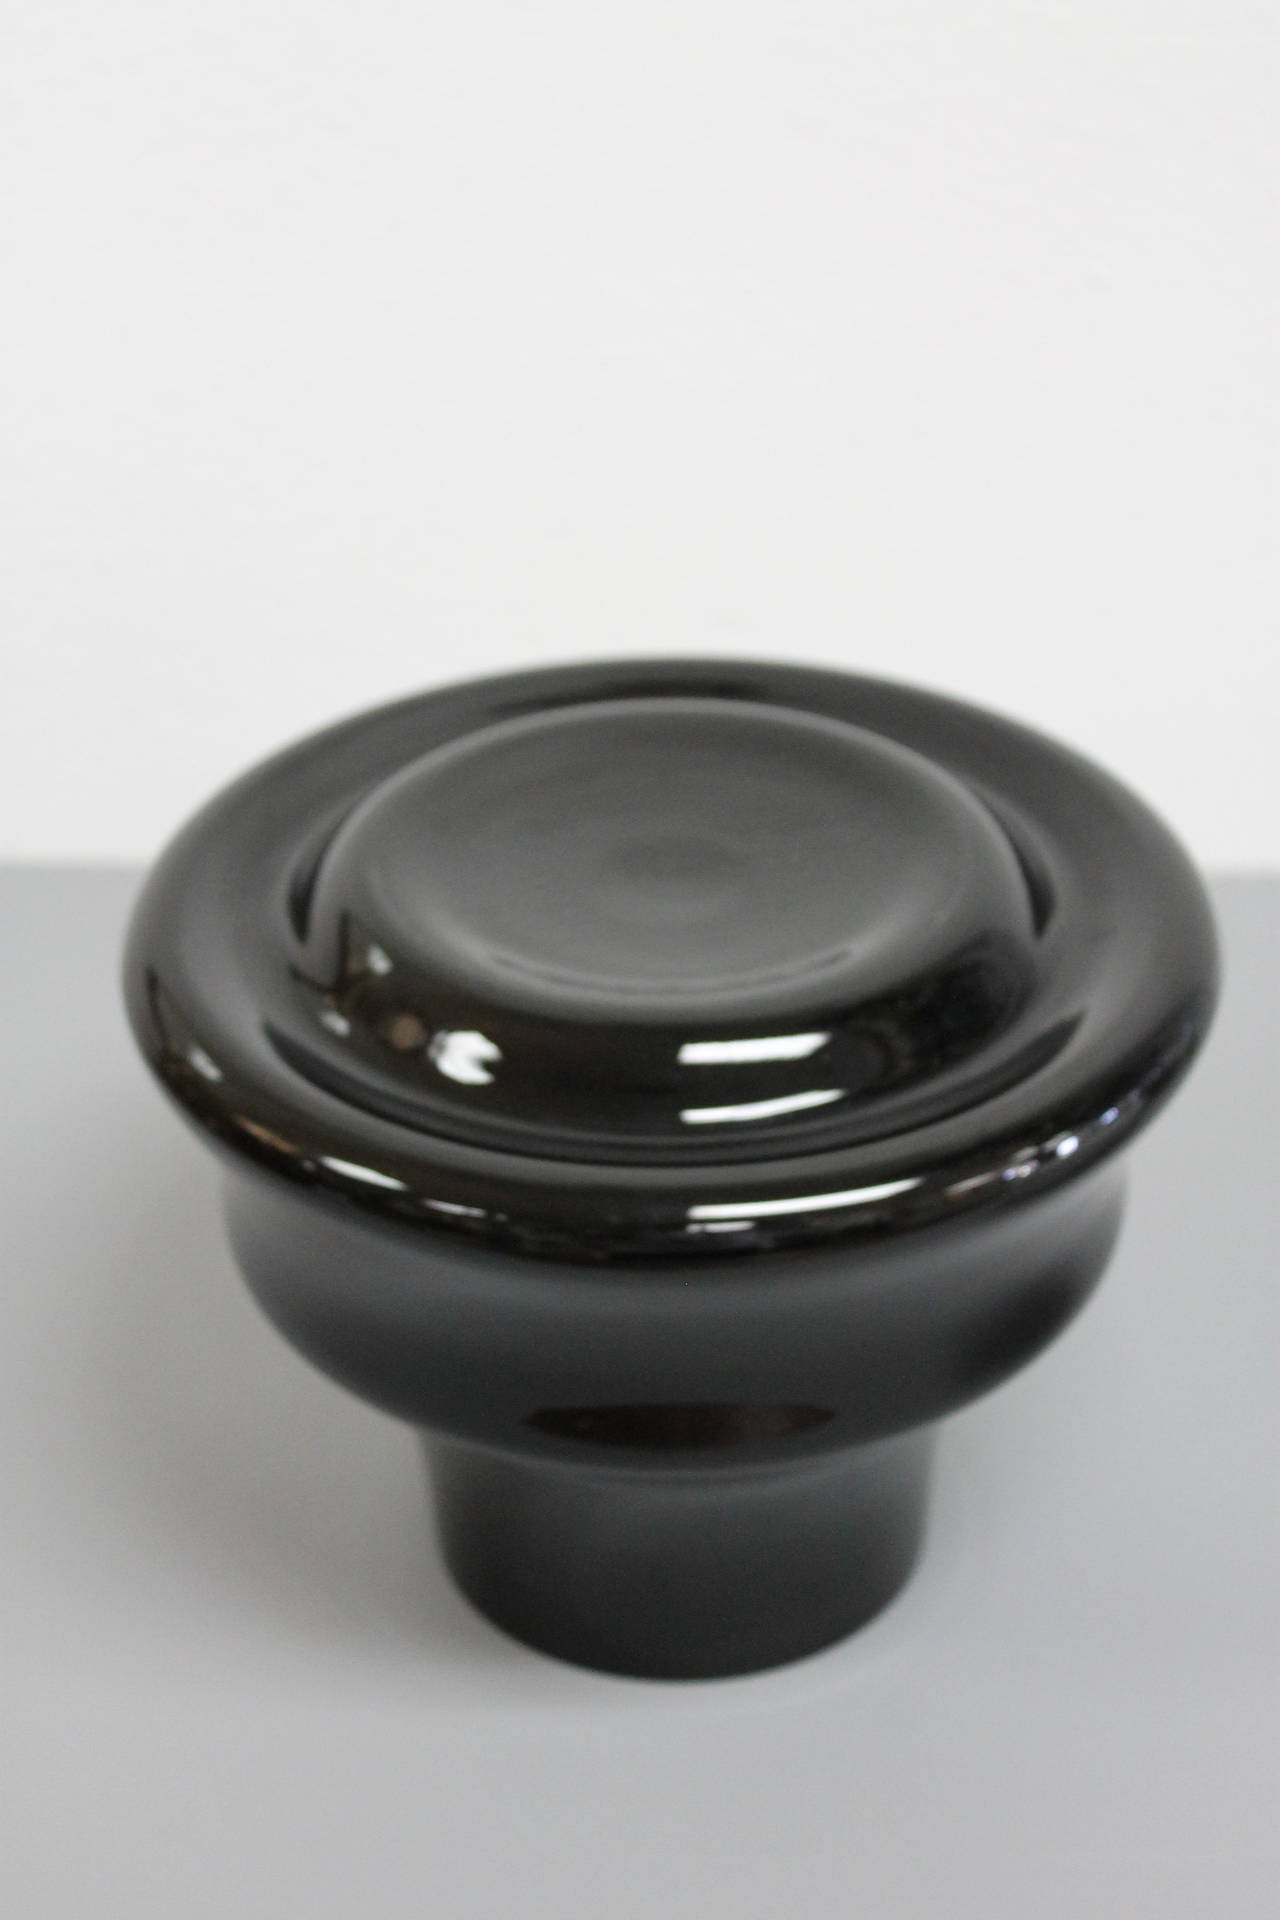 Art glass vase in black (we also have a smaller white version) designed by Sergio Asti and manufactured by Salviati.  Signed Salviati on the bottom.  The bottom is 9